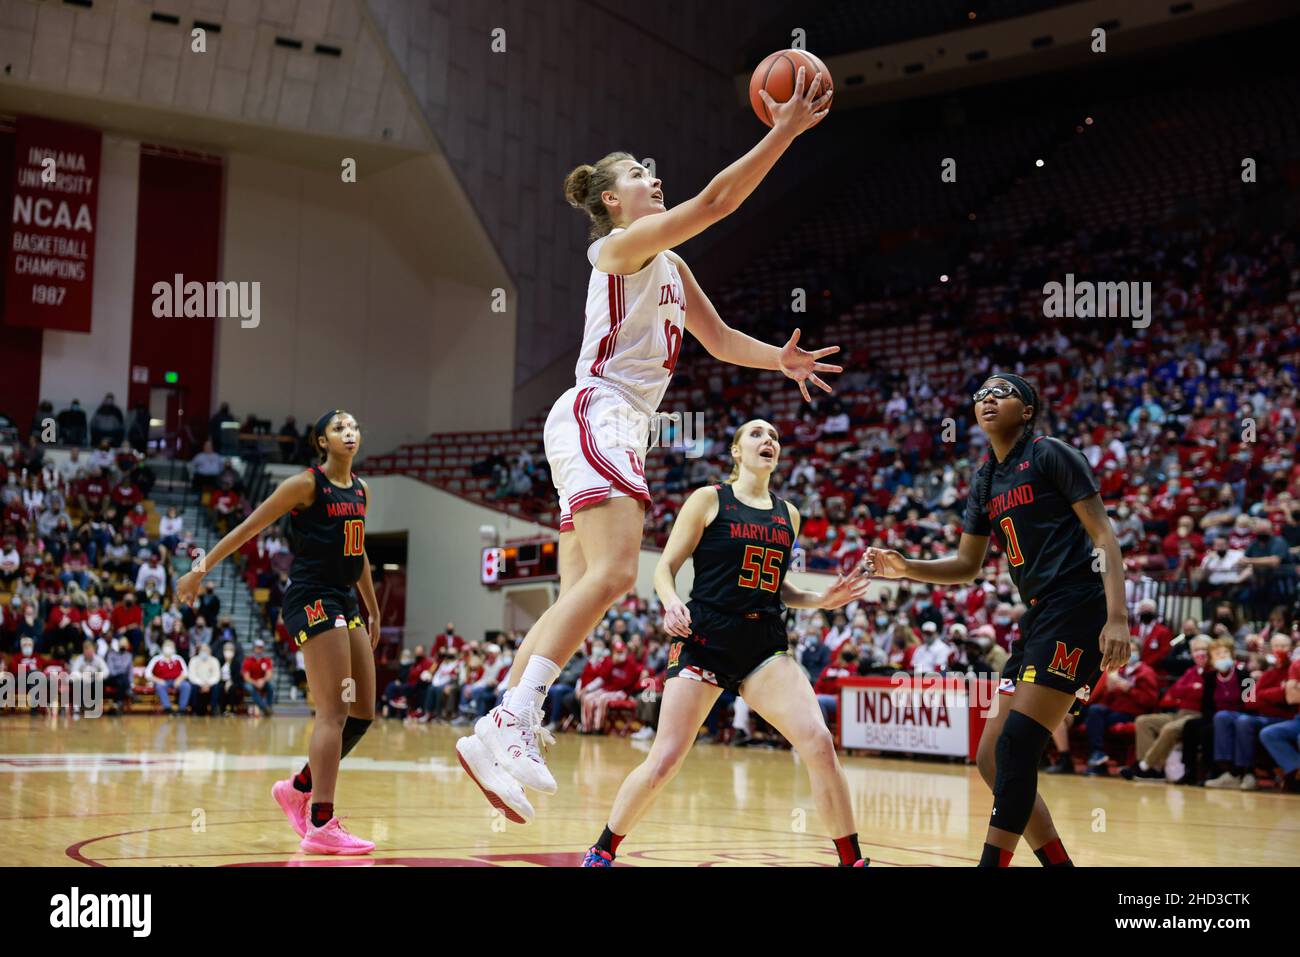 Bloomington, United States. 02nd Jan, 2022. Indiana Hoosiers forward Aleksa Gulbe (L2) shoots against Maryland Terrapins guard Shyanne Sellers (R) during the National Collegiate Athletic Association (NCAA) women's basketball game in Bloomington. Indiana University beat Maryland 70-63. Credit: SOPA Images Limited/Alamy Live News Stock Photo